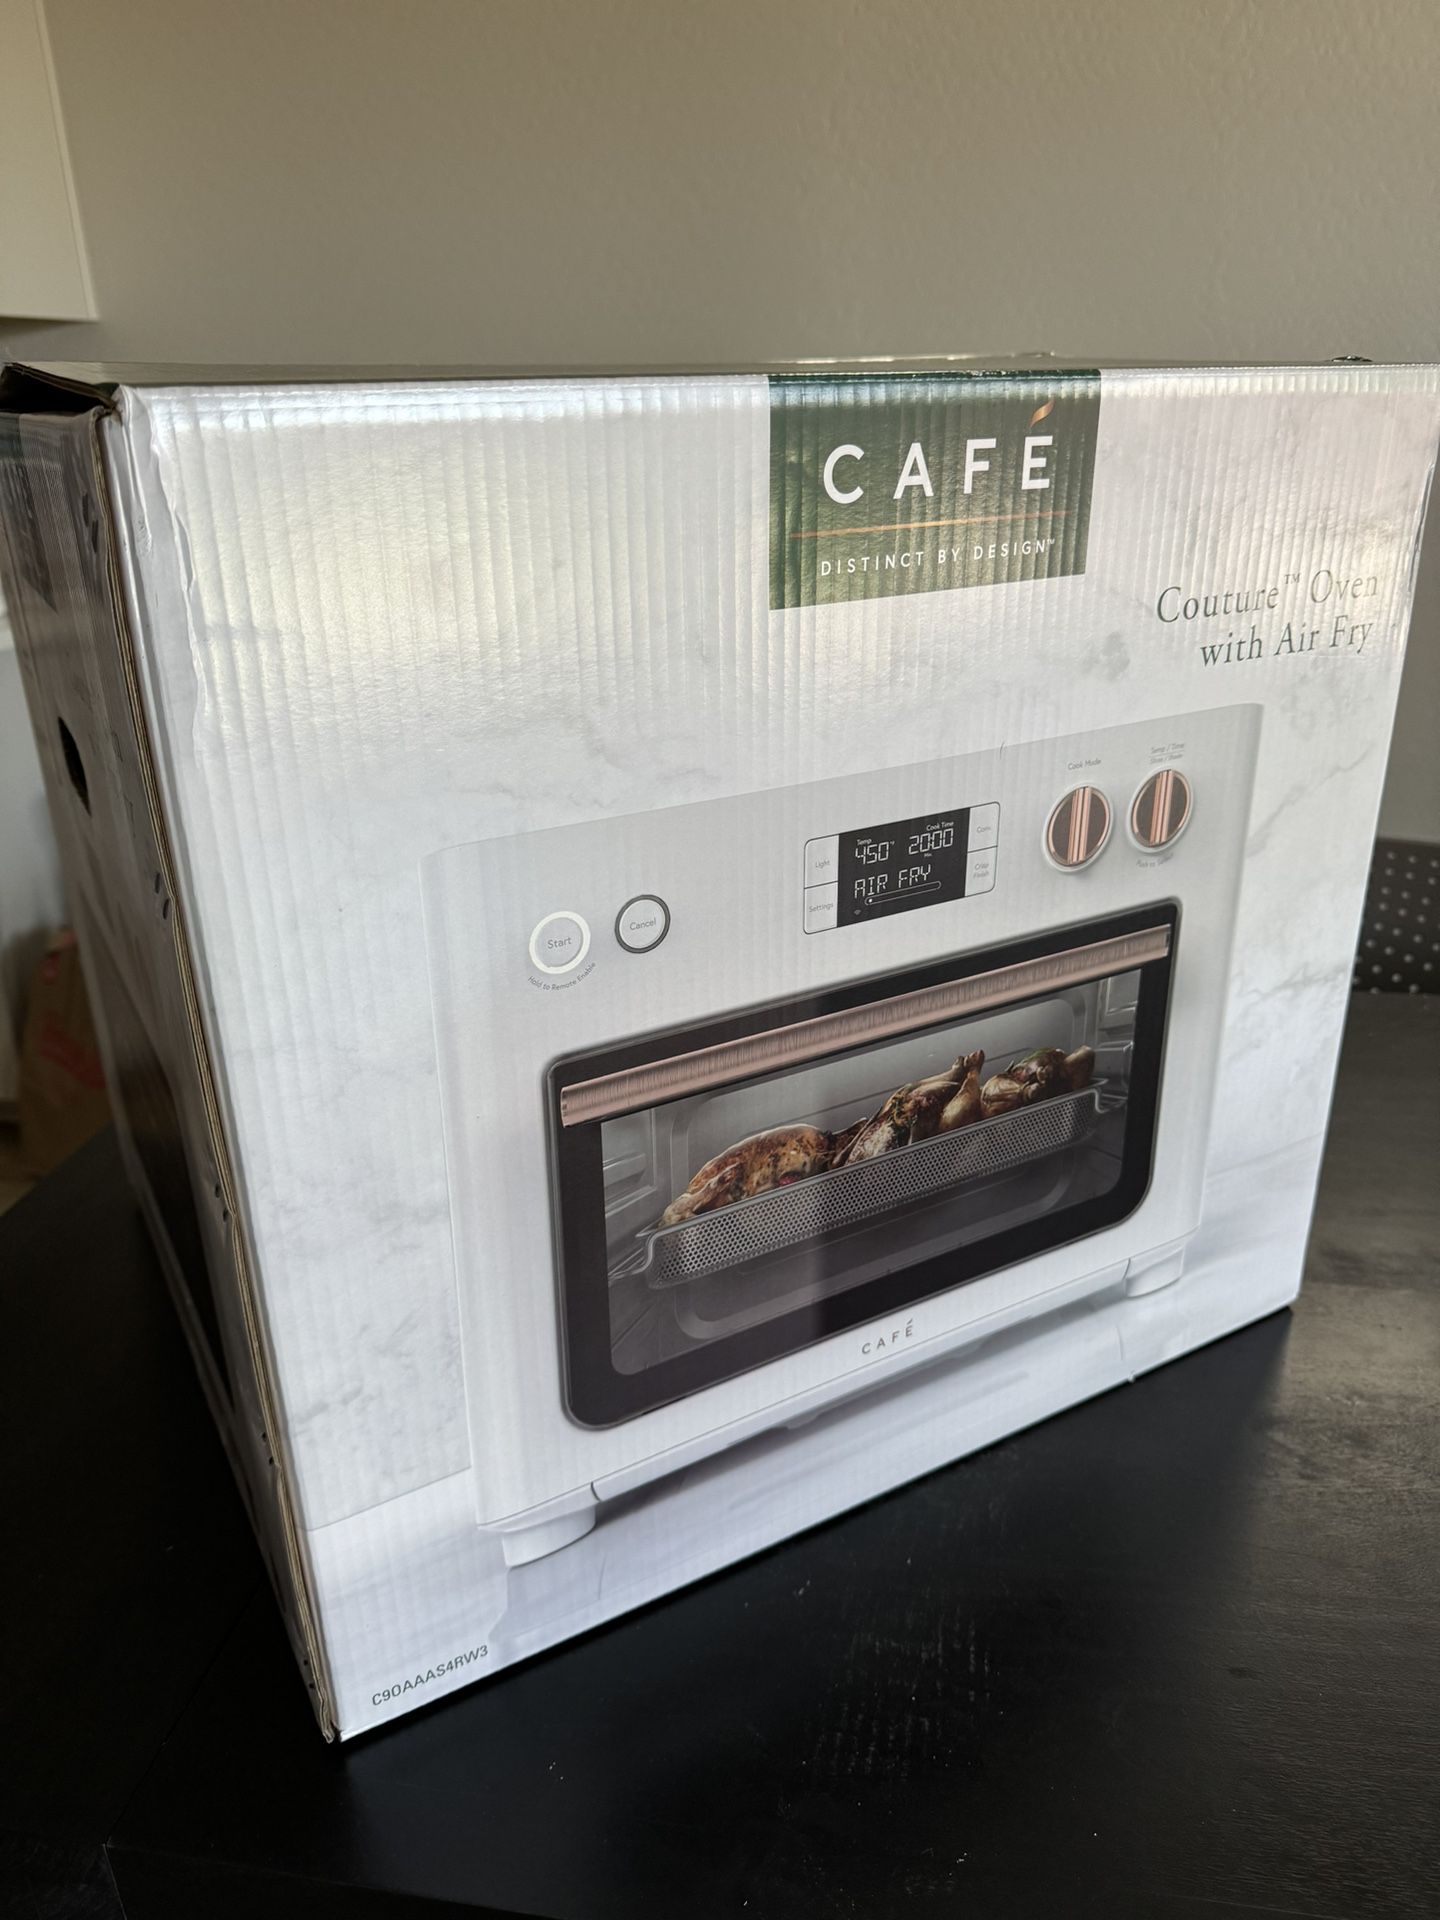 NEVER OPENED: Cafe Couture Smart Toaster Oven with air fry - matte white